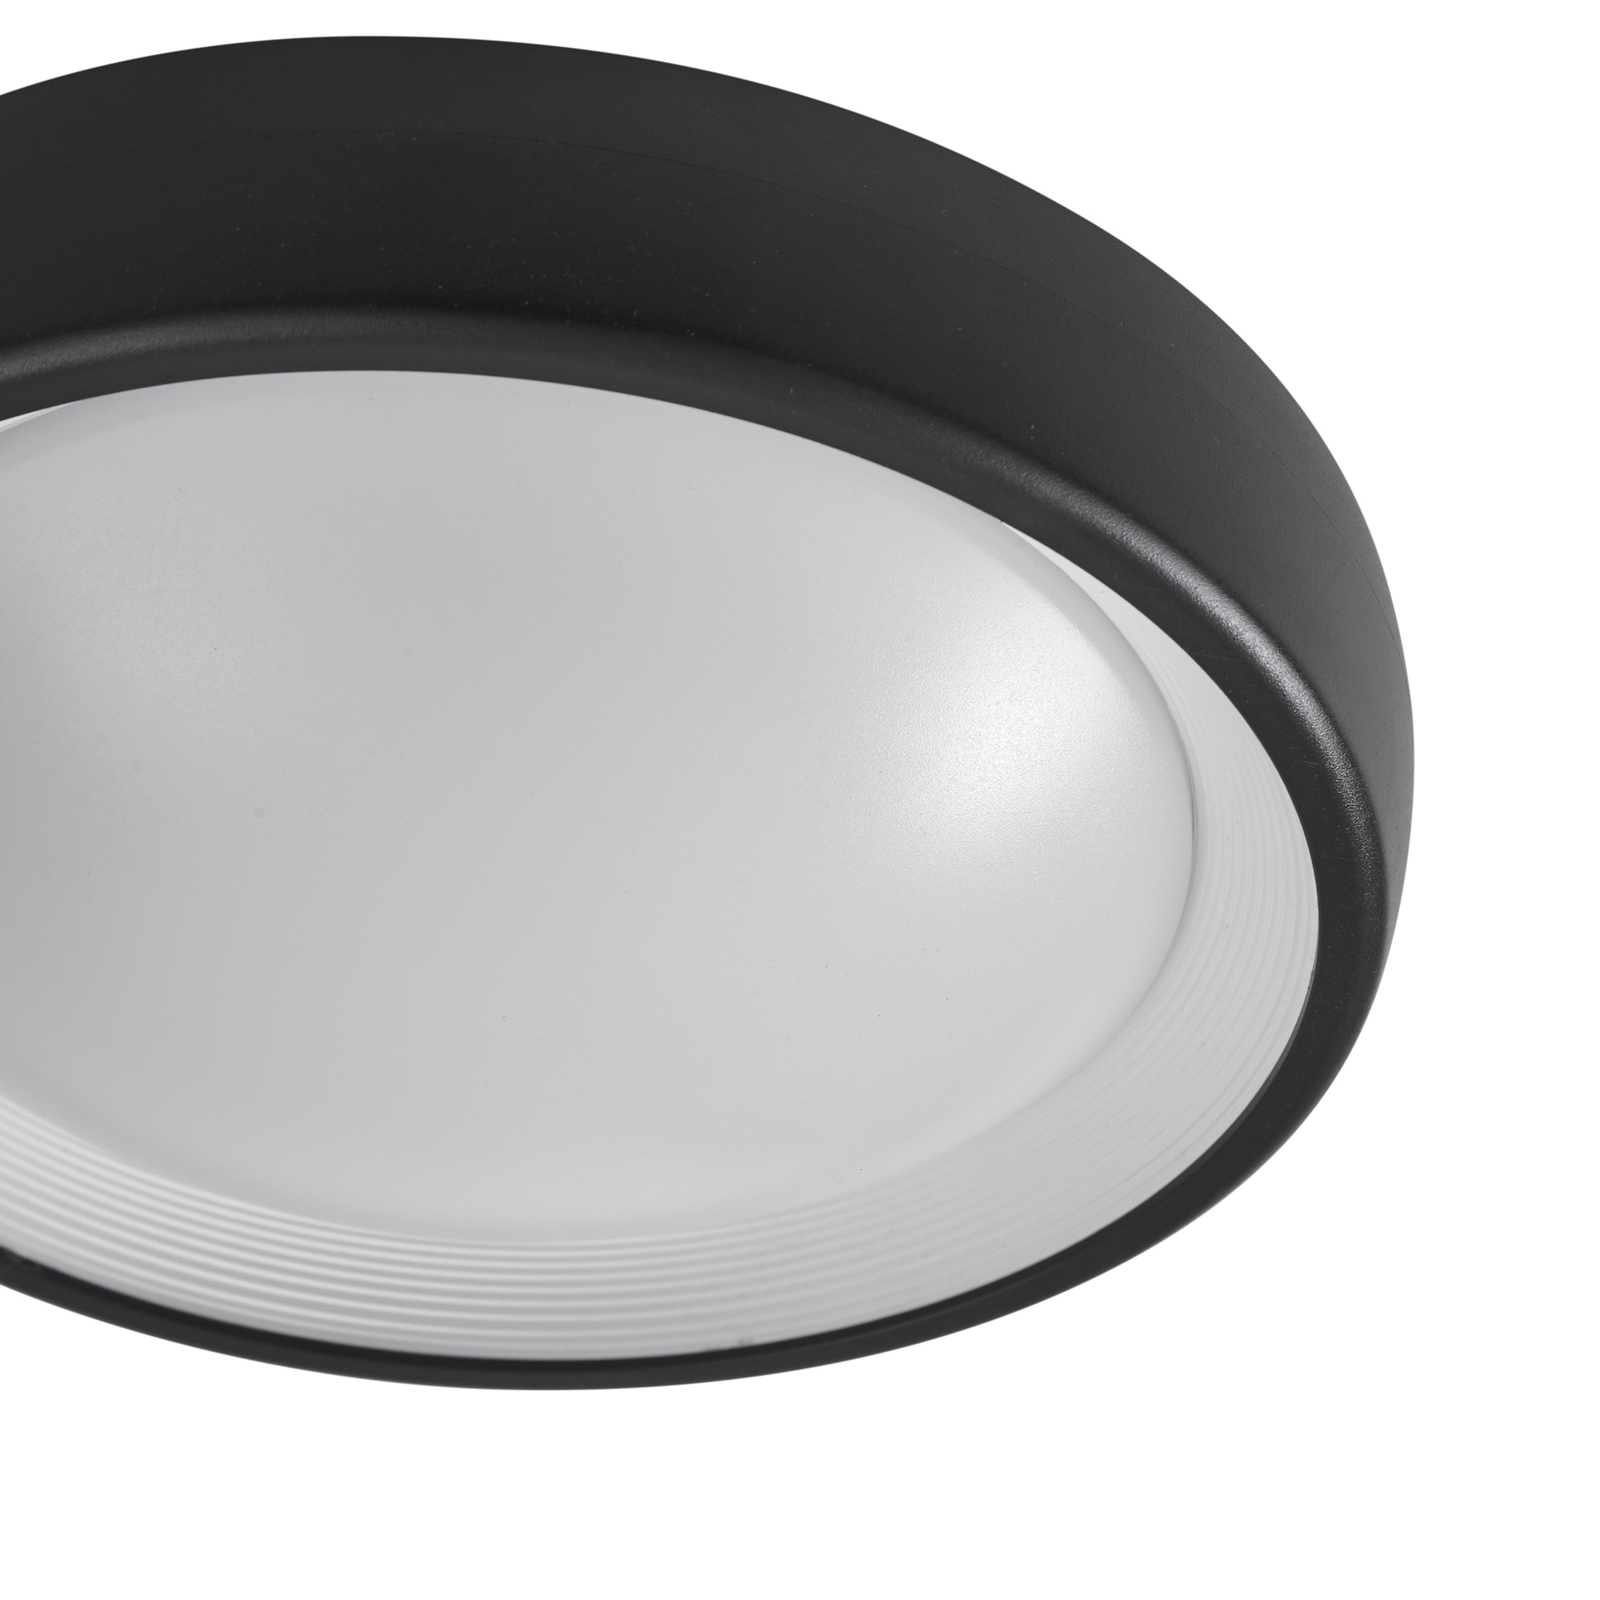 Lindby LED outdoor ceiling lamp Niniel, black/white, plastic